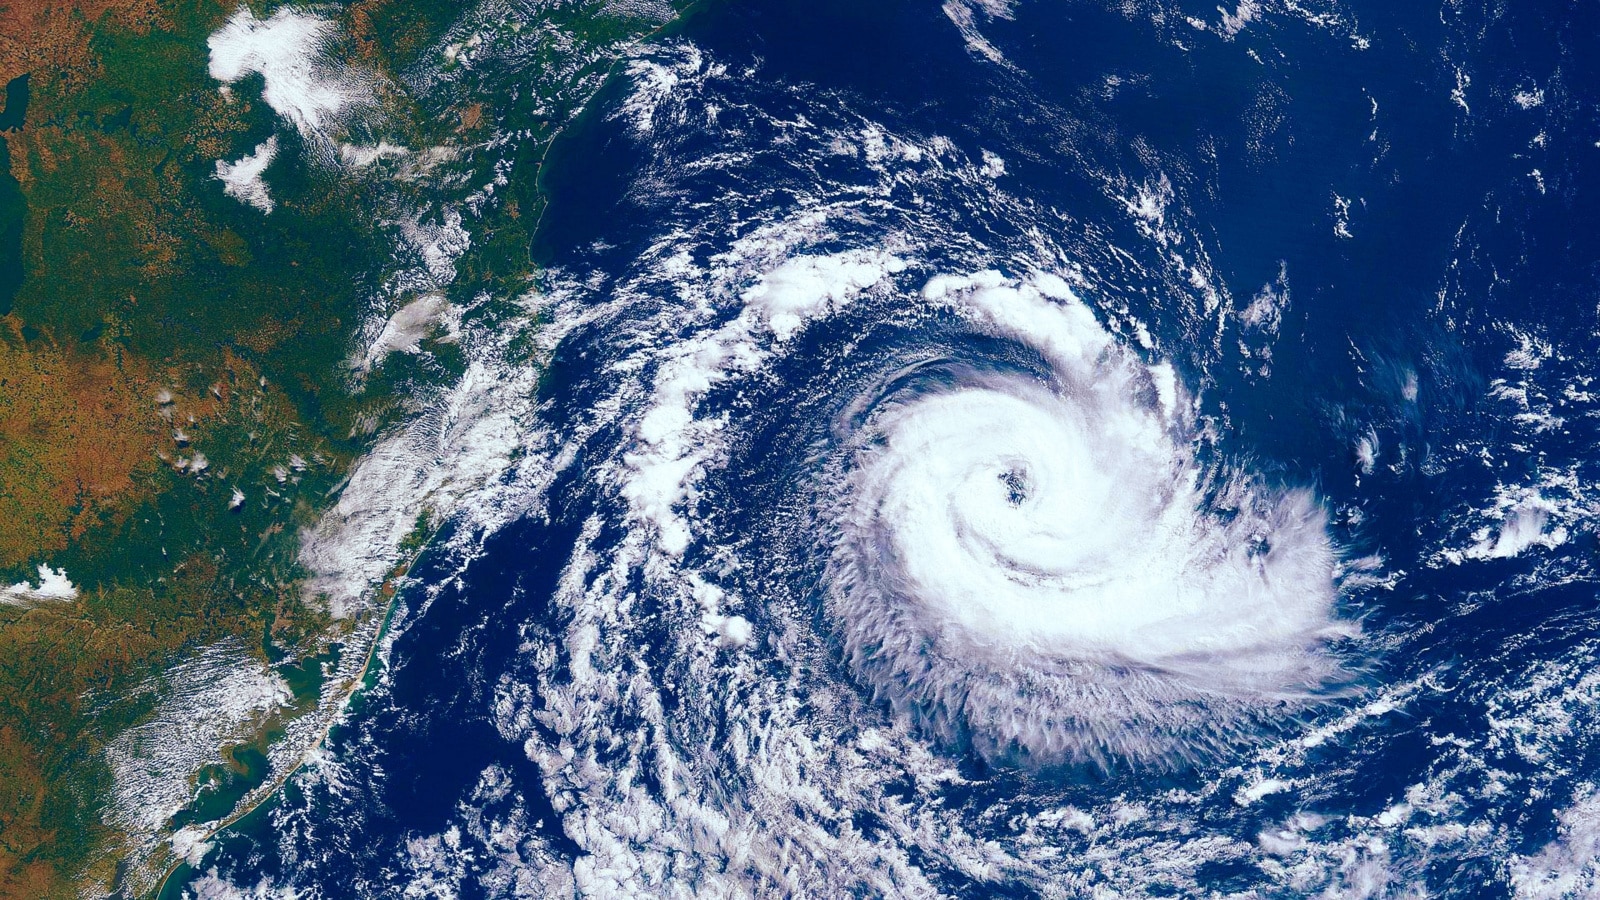 Category 5 super typhoon approaching the coast. The eye of the hurricane. View from outer space Some elements of this image furnished by NASA